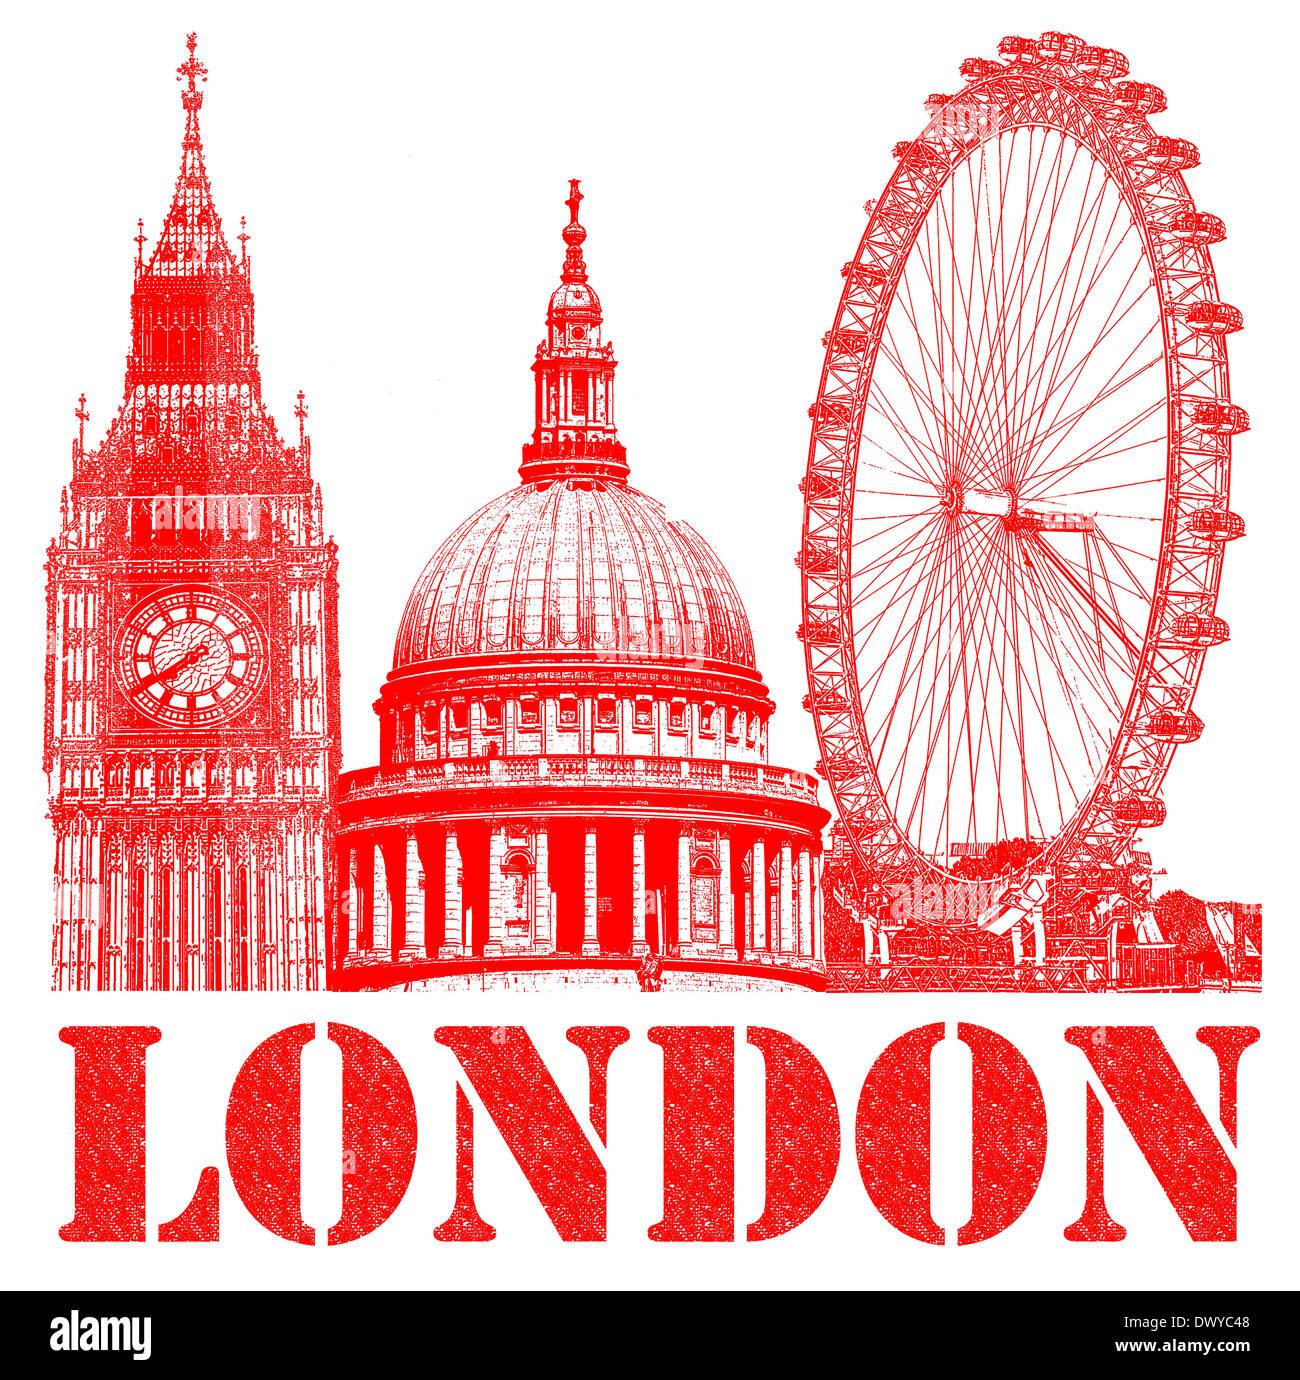 A red London rubber stamp featuring Big Ben, St. Paul's Cathedral and the London Eye. Stock Photo